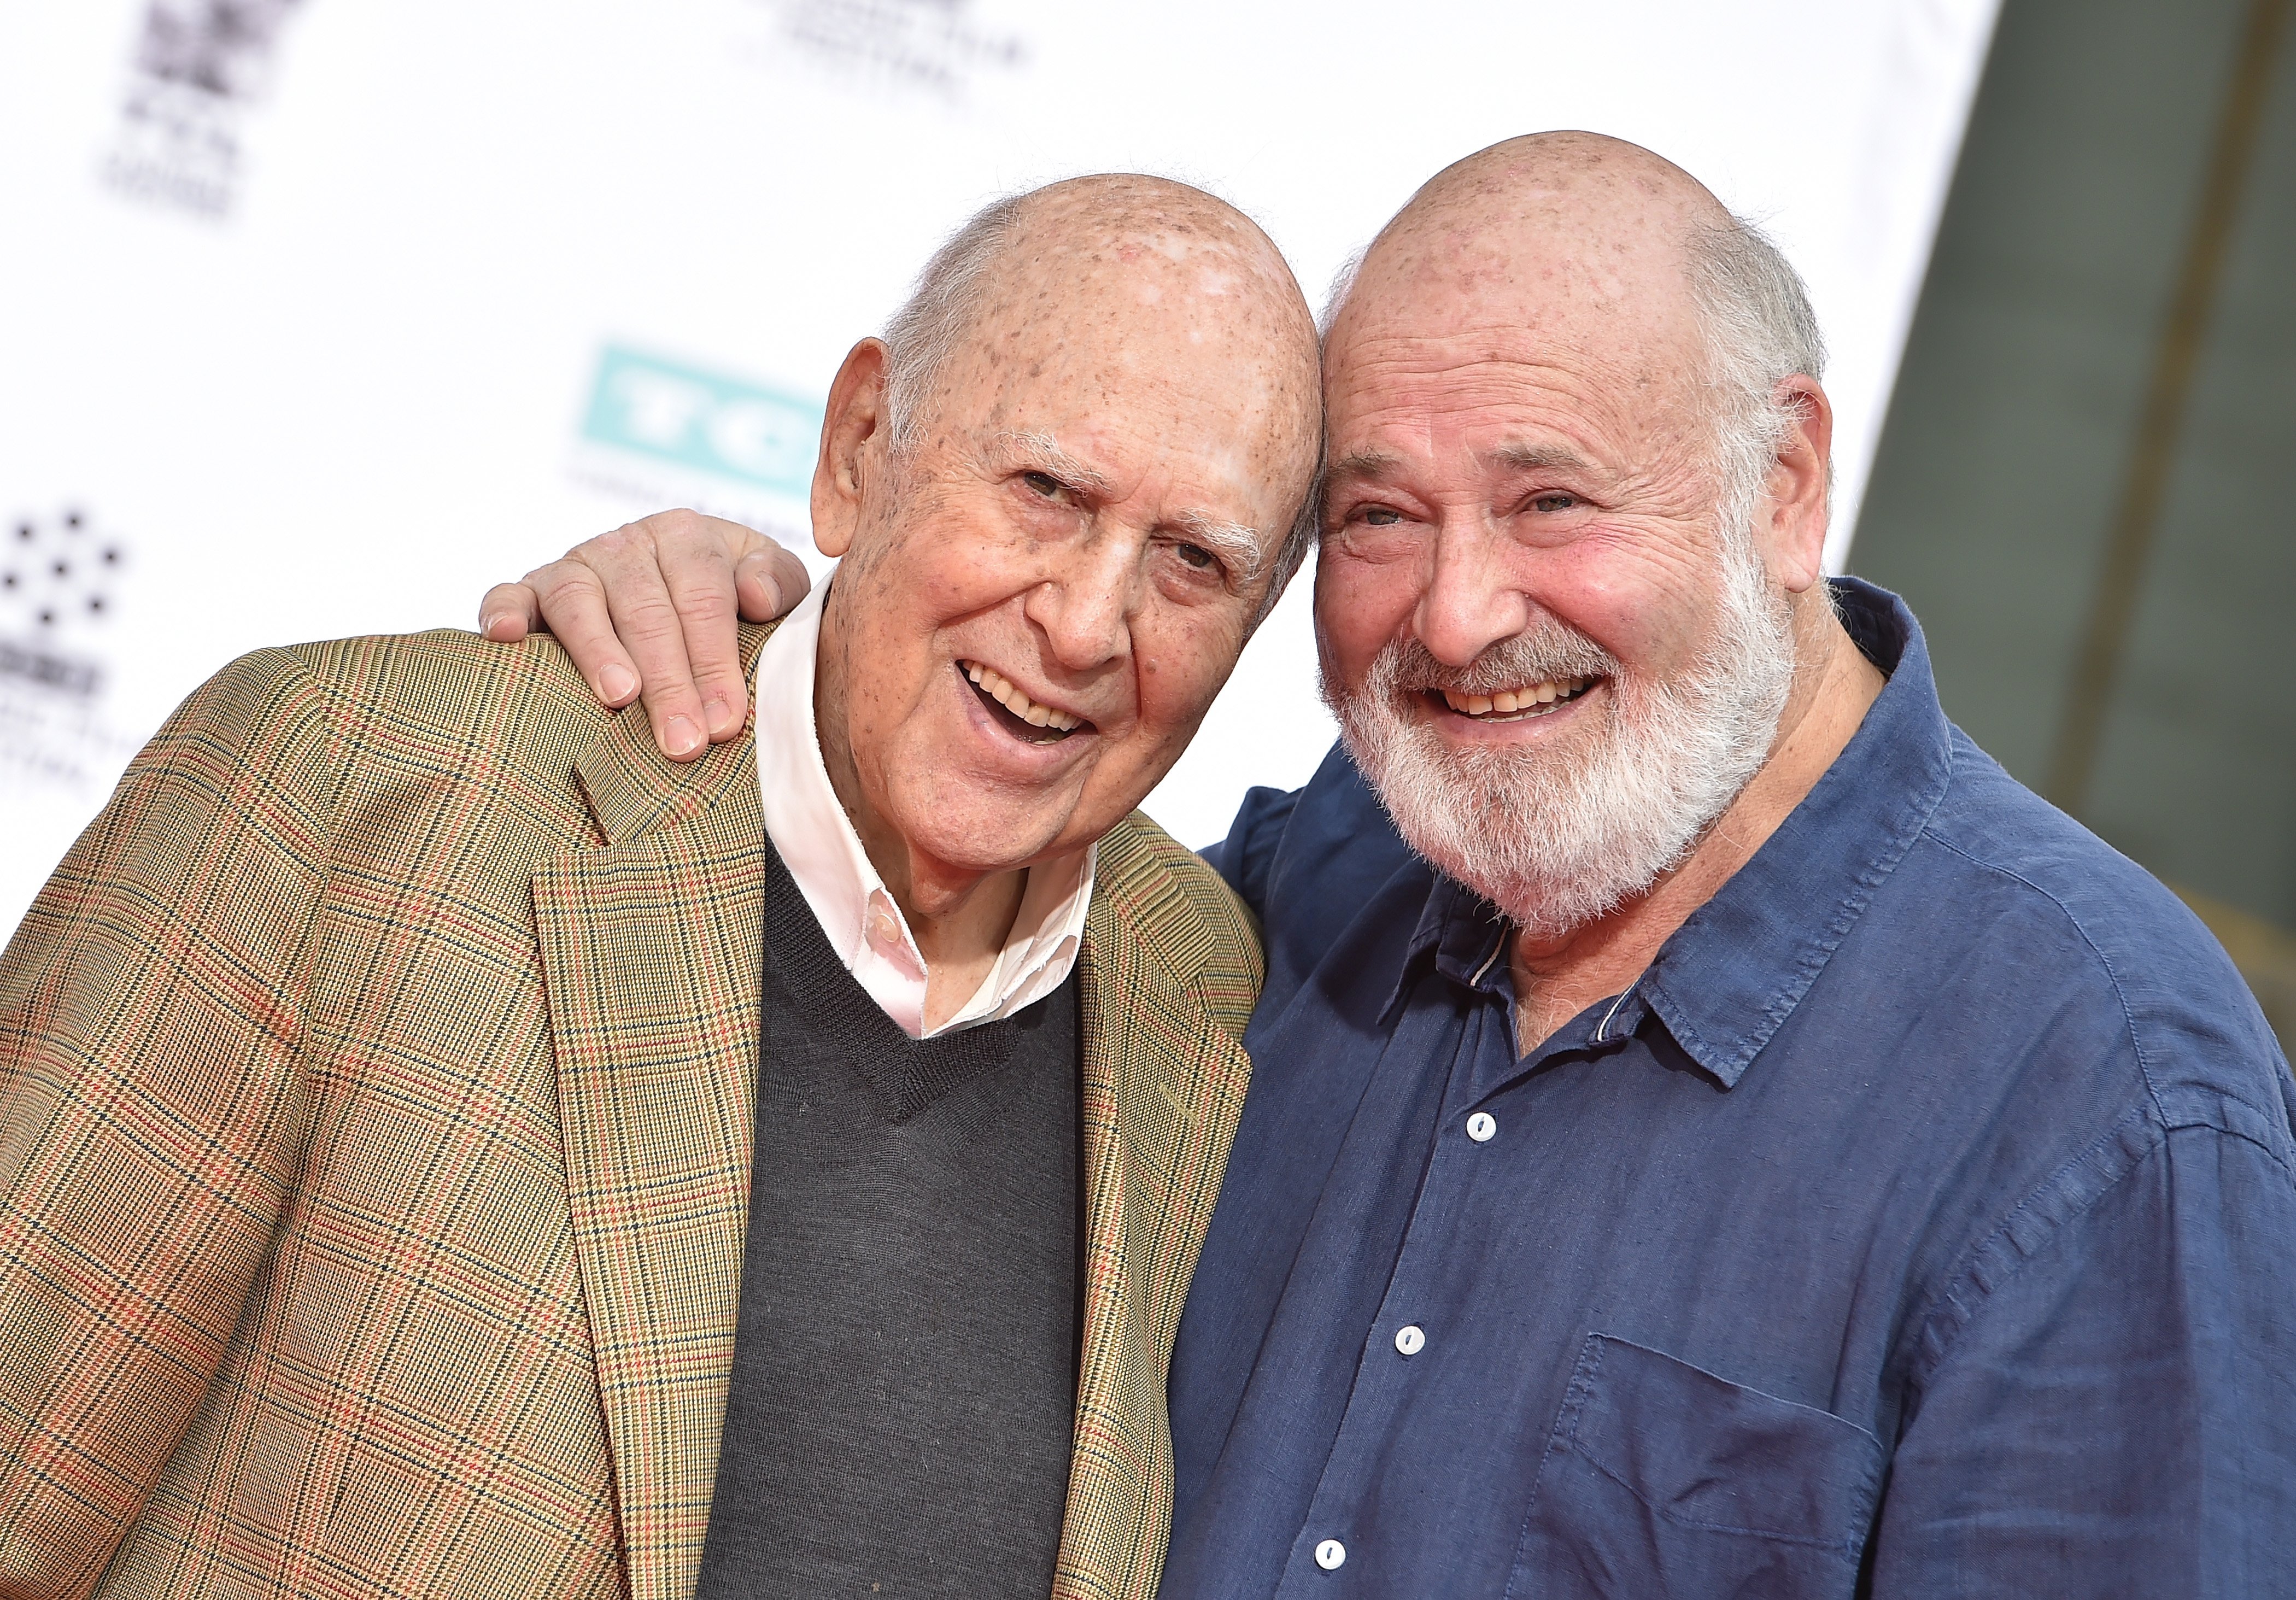 Carl Reiner and Rob Reiner are honored with a Hand and Footprint Ceremony on April 7, 2017, in Hollywood, California. | Source: Getty Images.